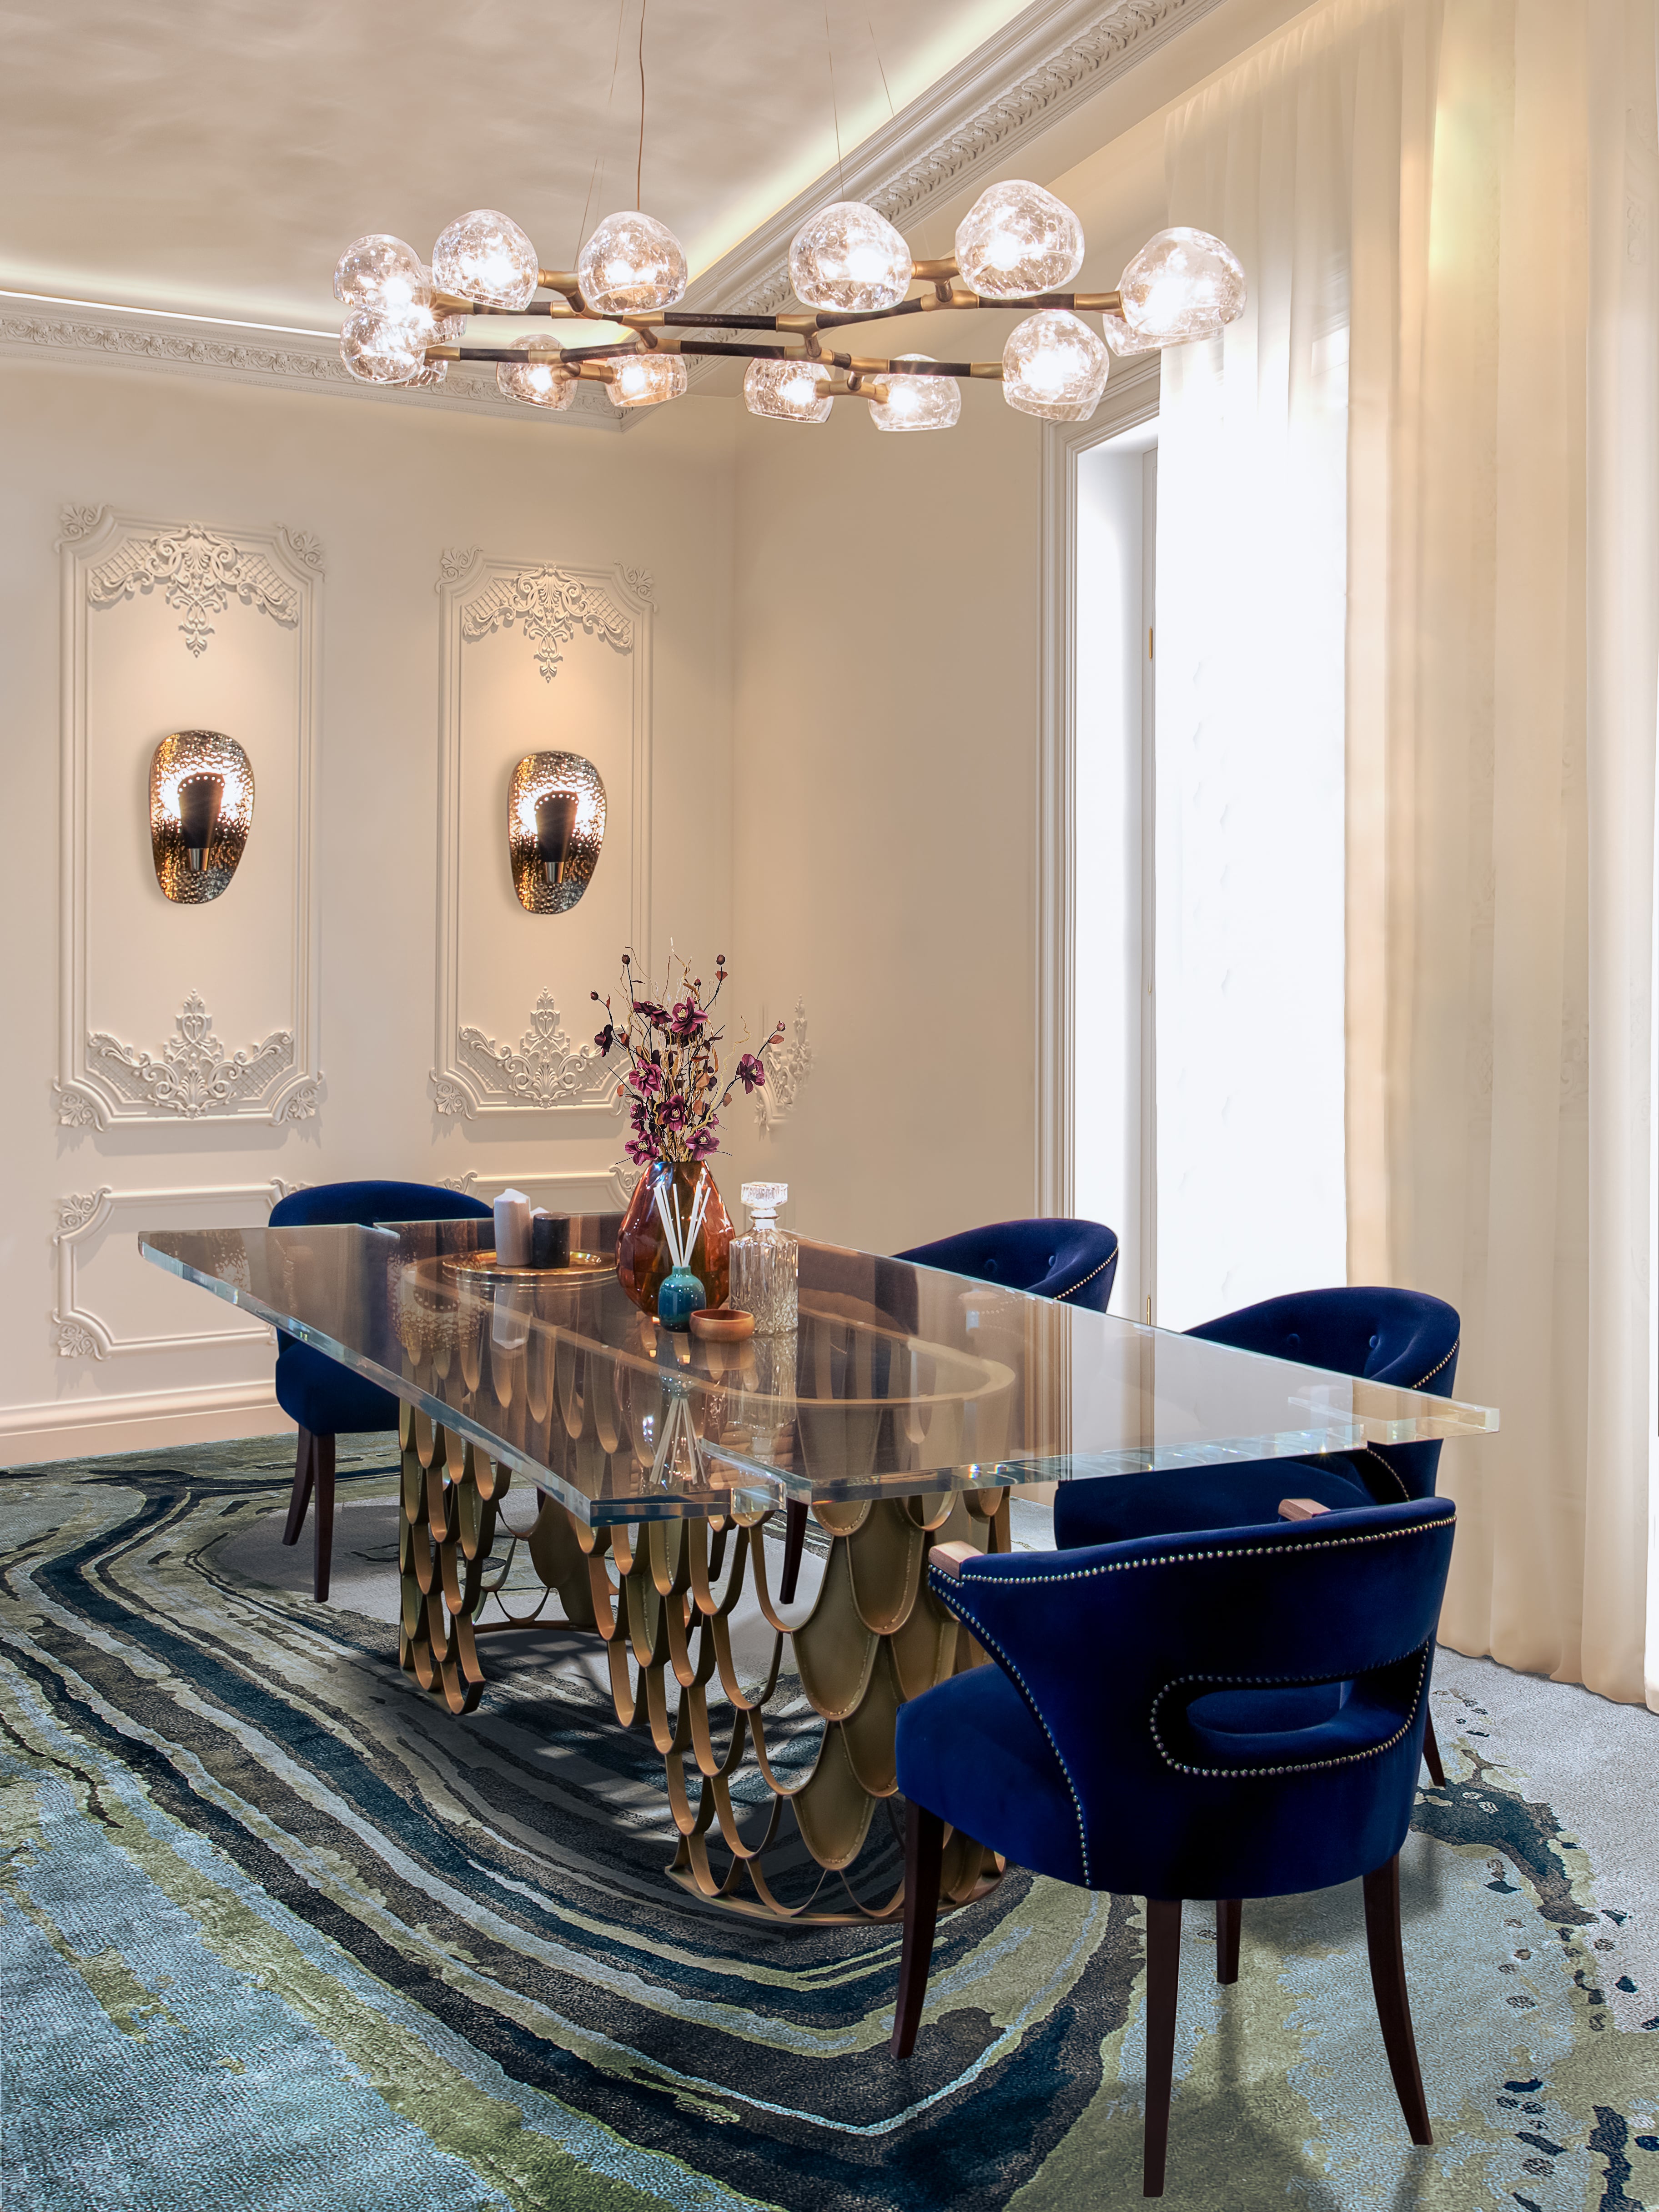 Impressive Dining Room Decor With Strong Blue Dining Chair - Home'Society